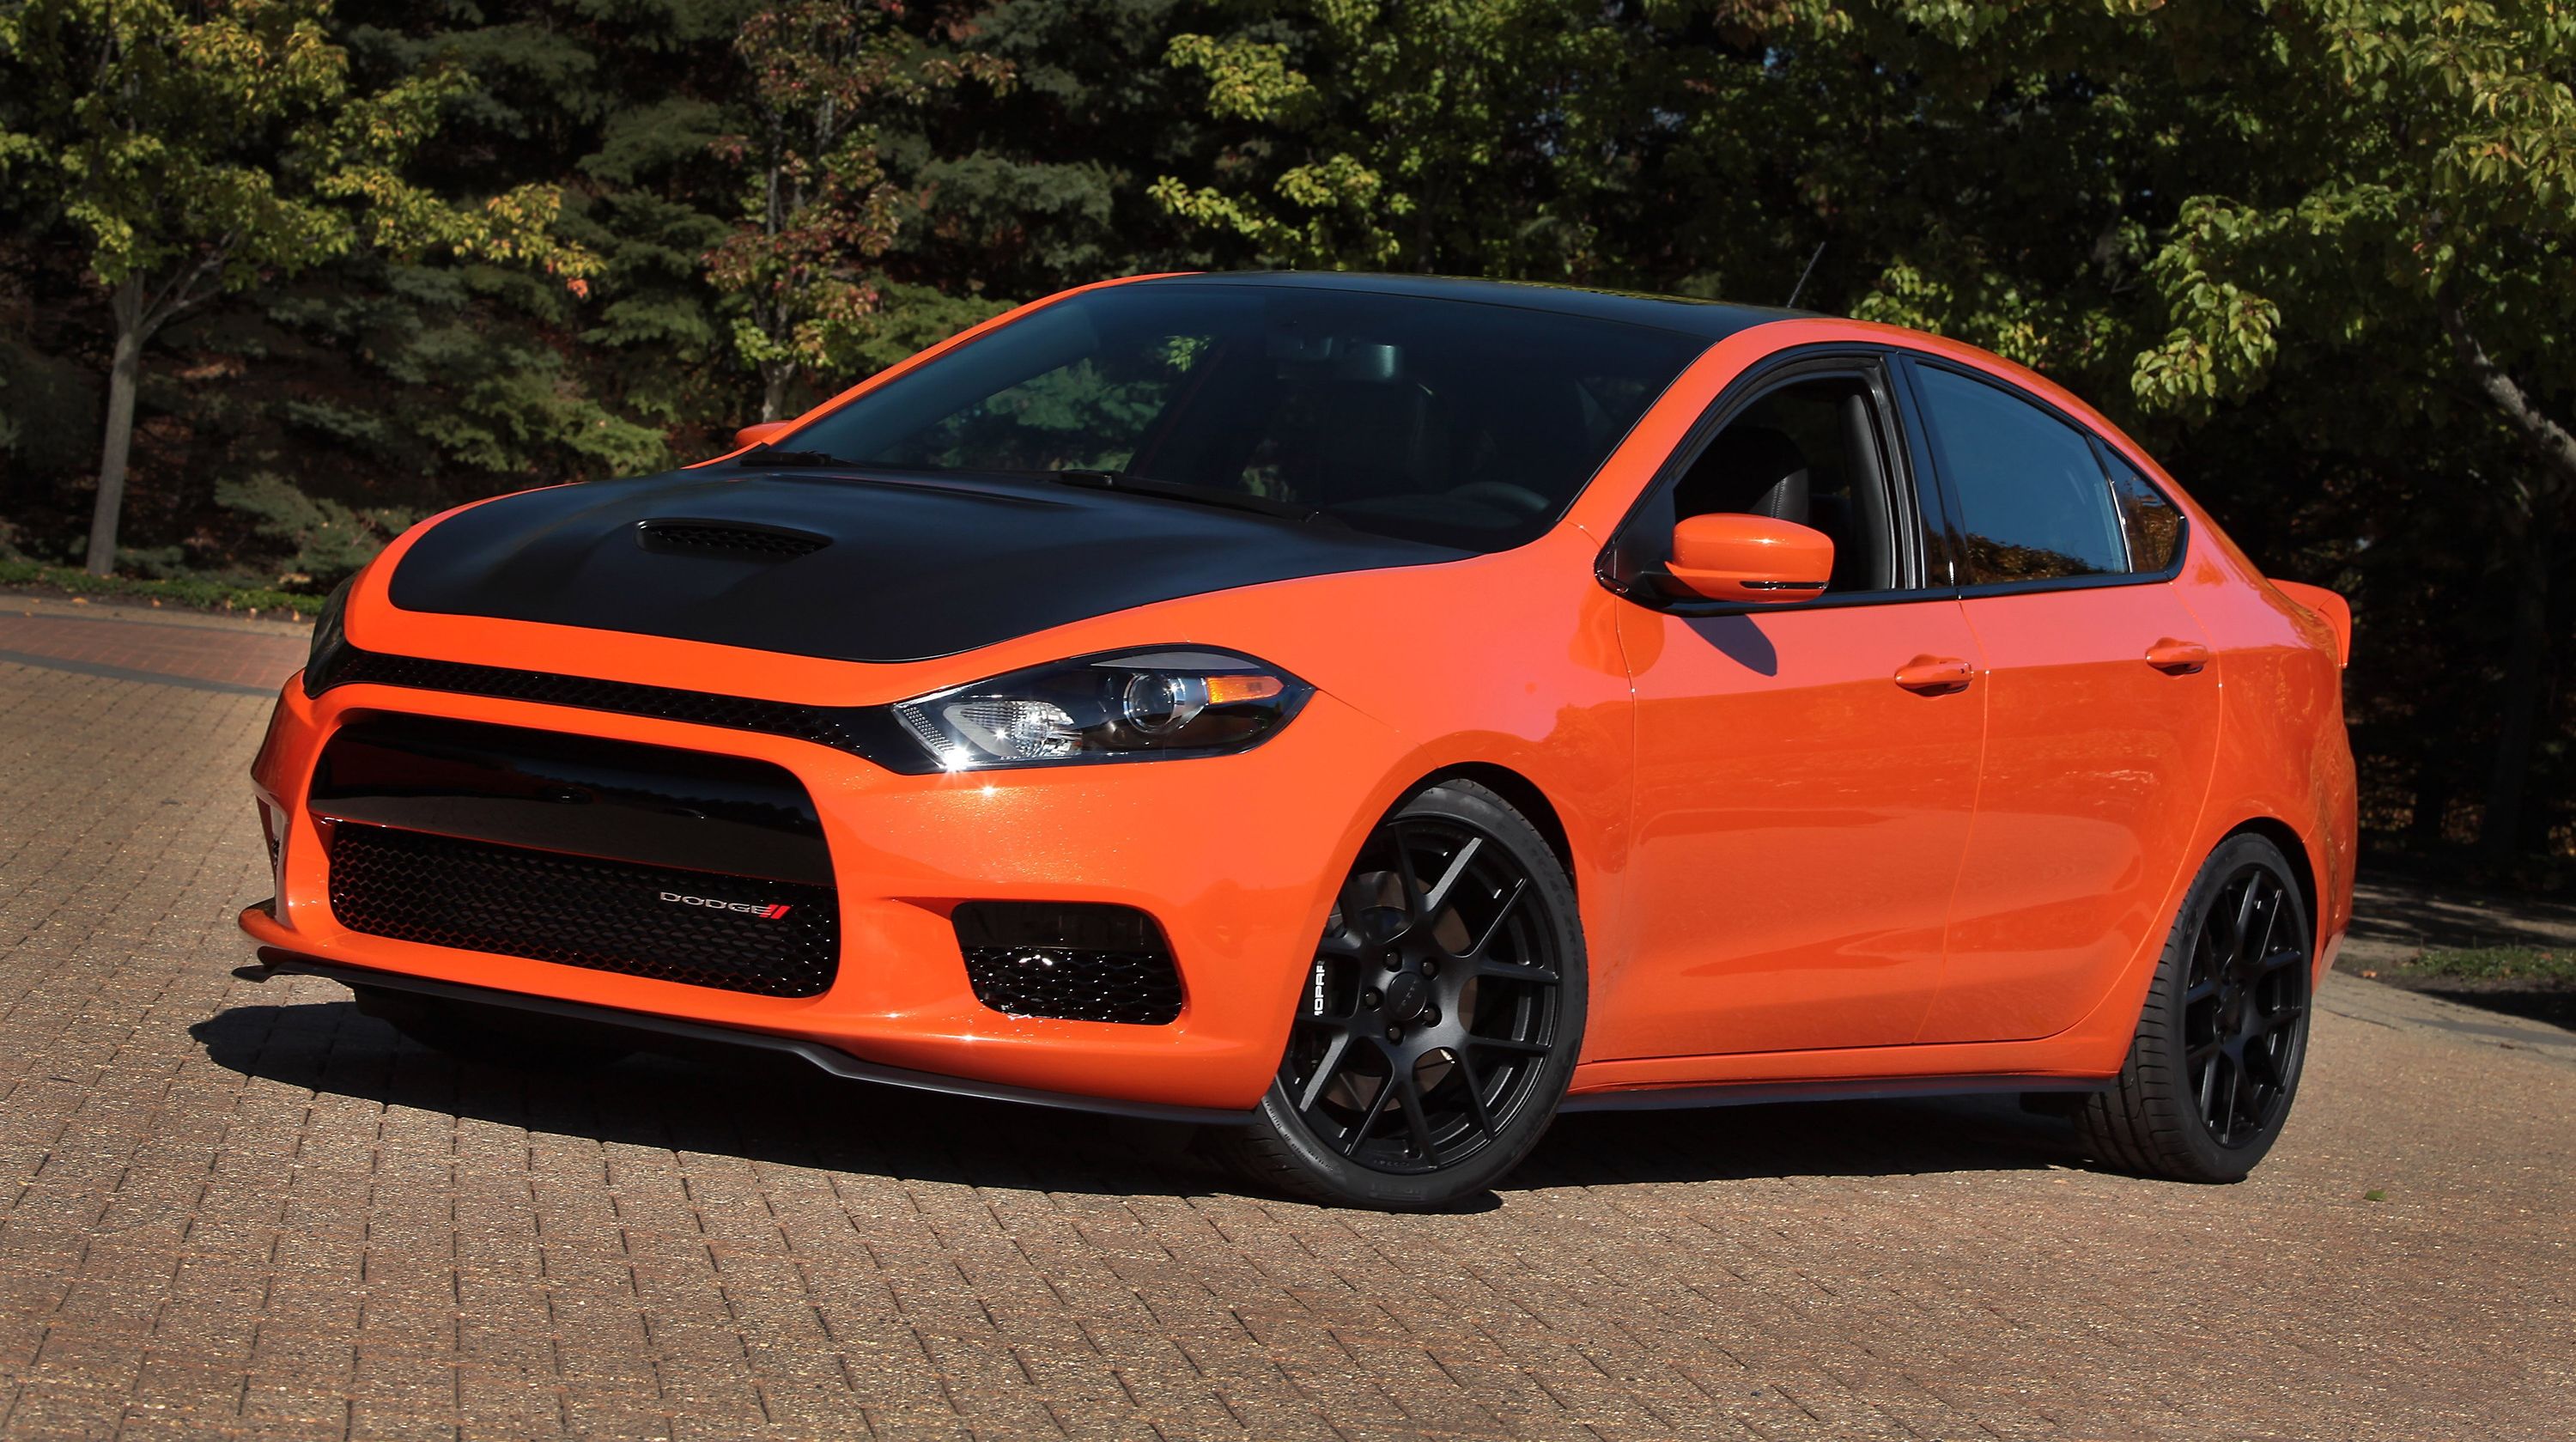  The Dodge Dart finally gets the R/T treatment, but it is only for the SEMA show. Might this make it to production?